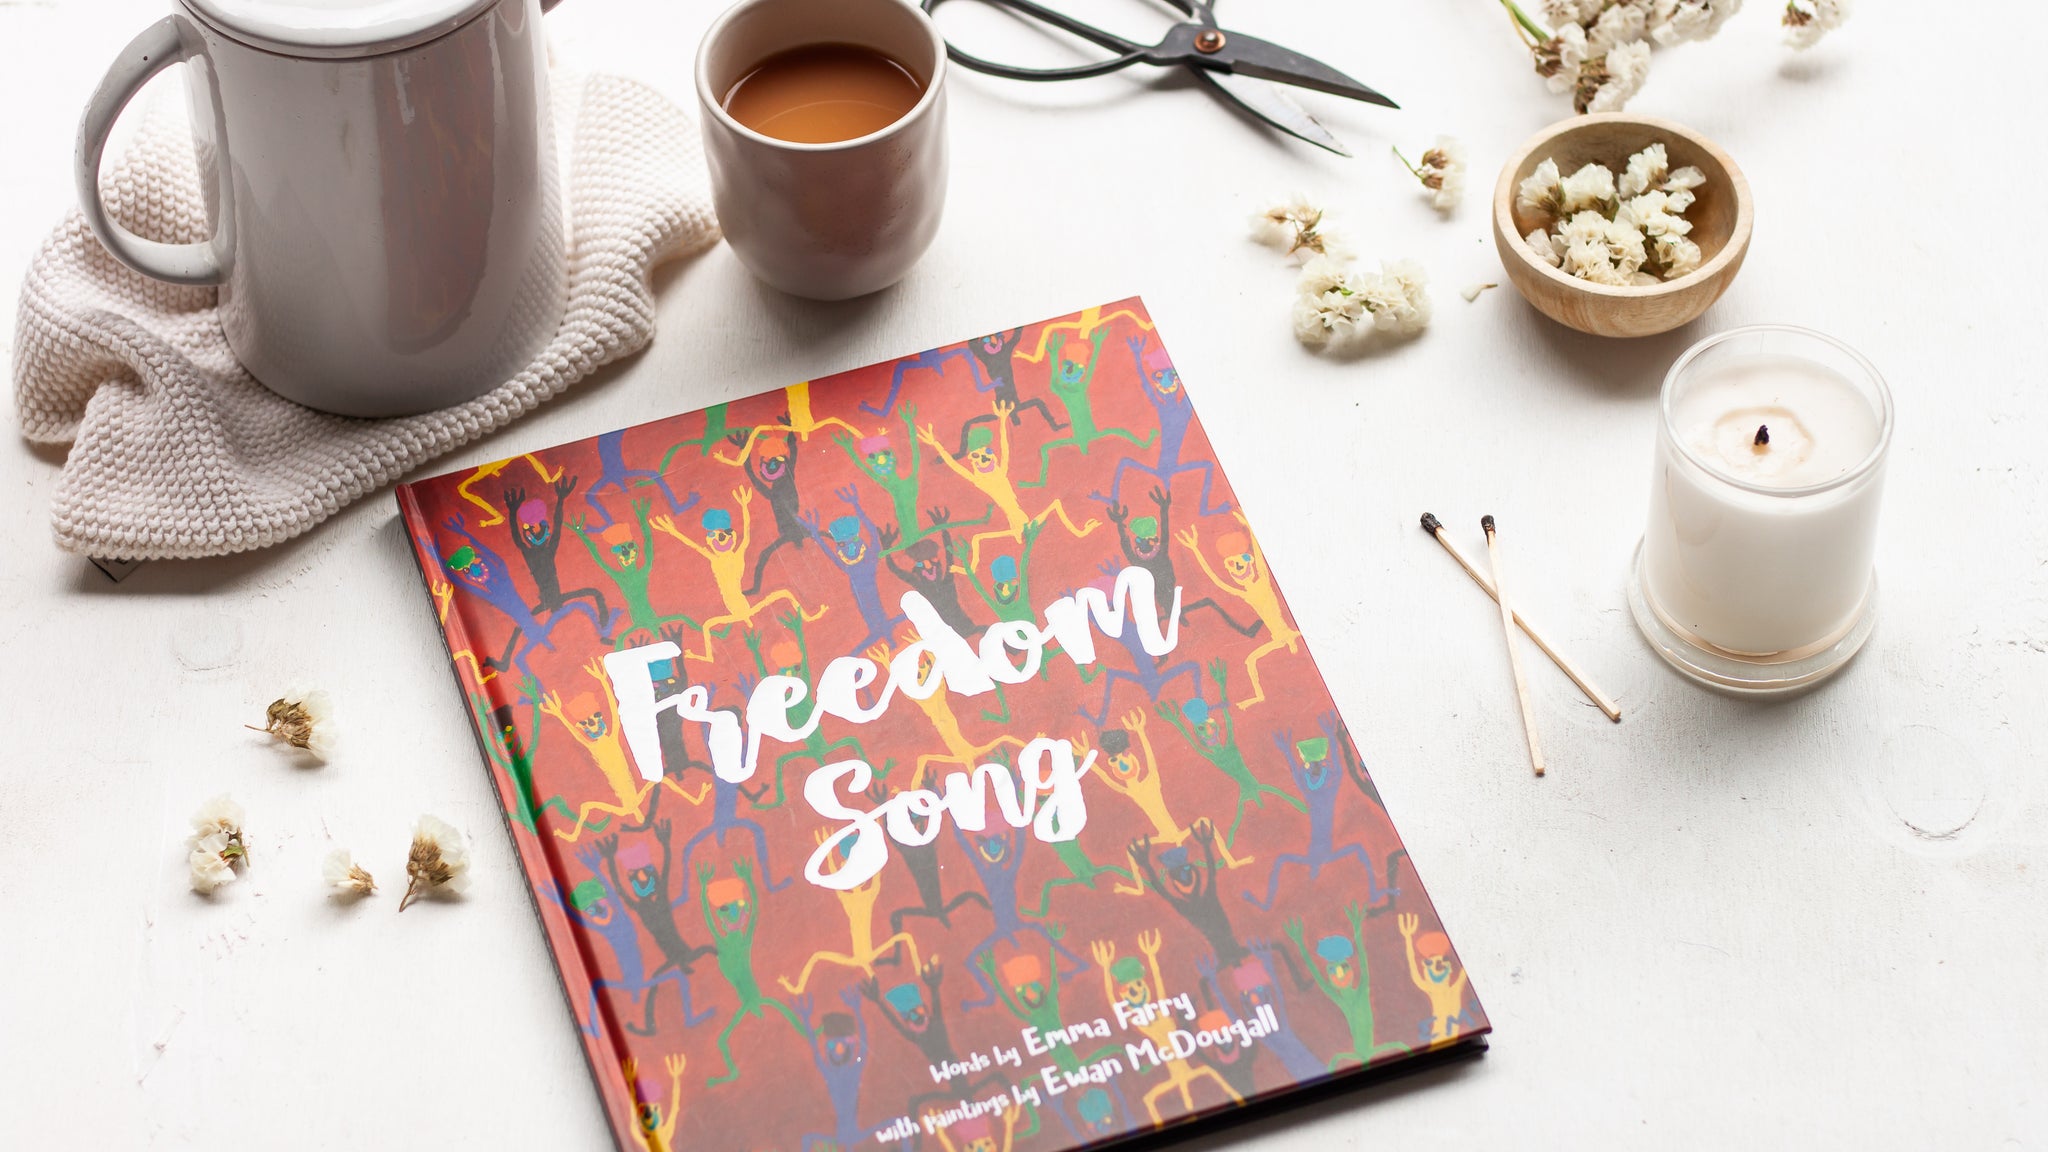 Emma Farry on Freedom Song - The Cafe